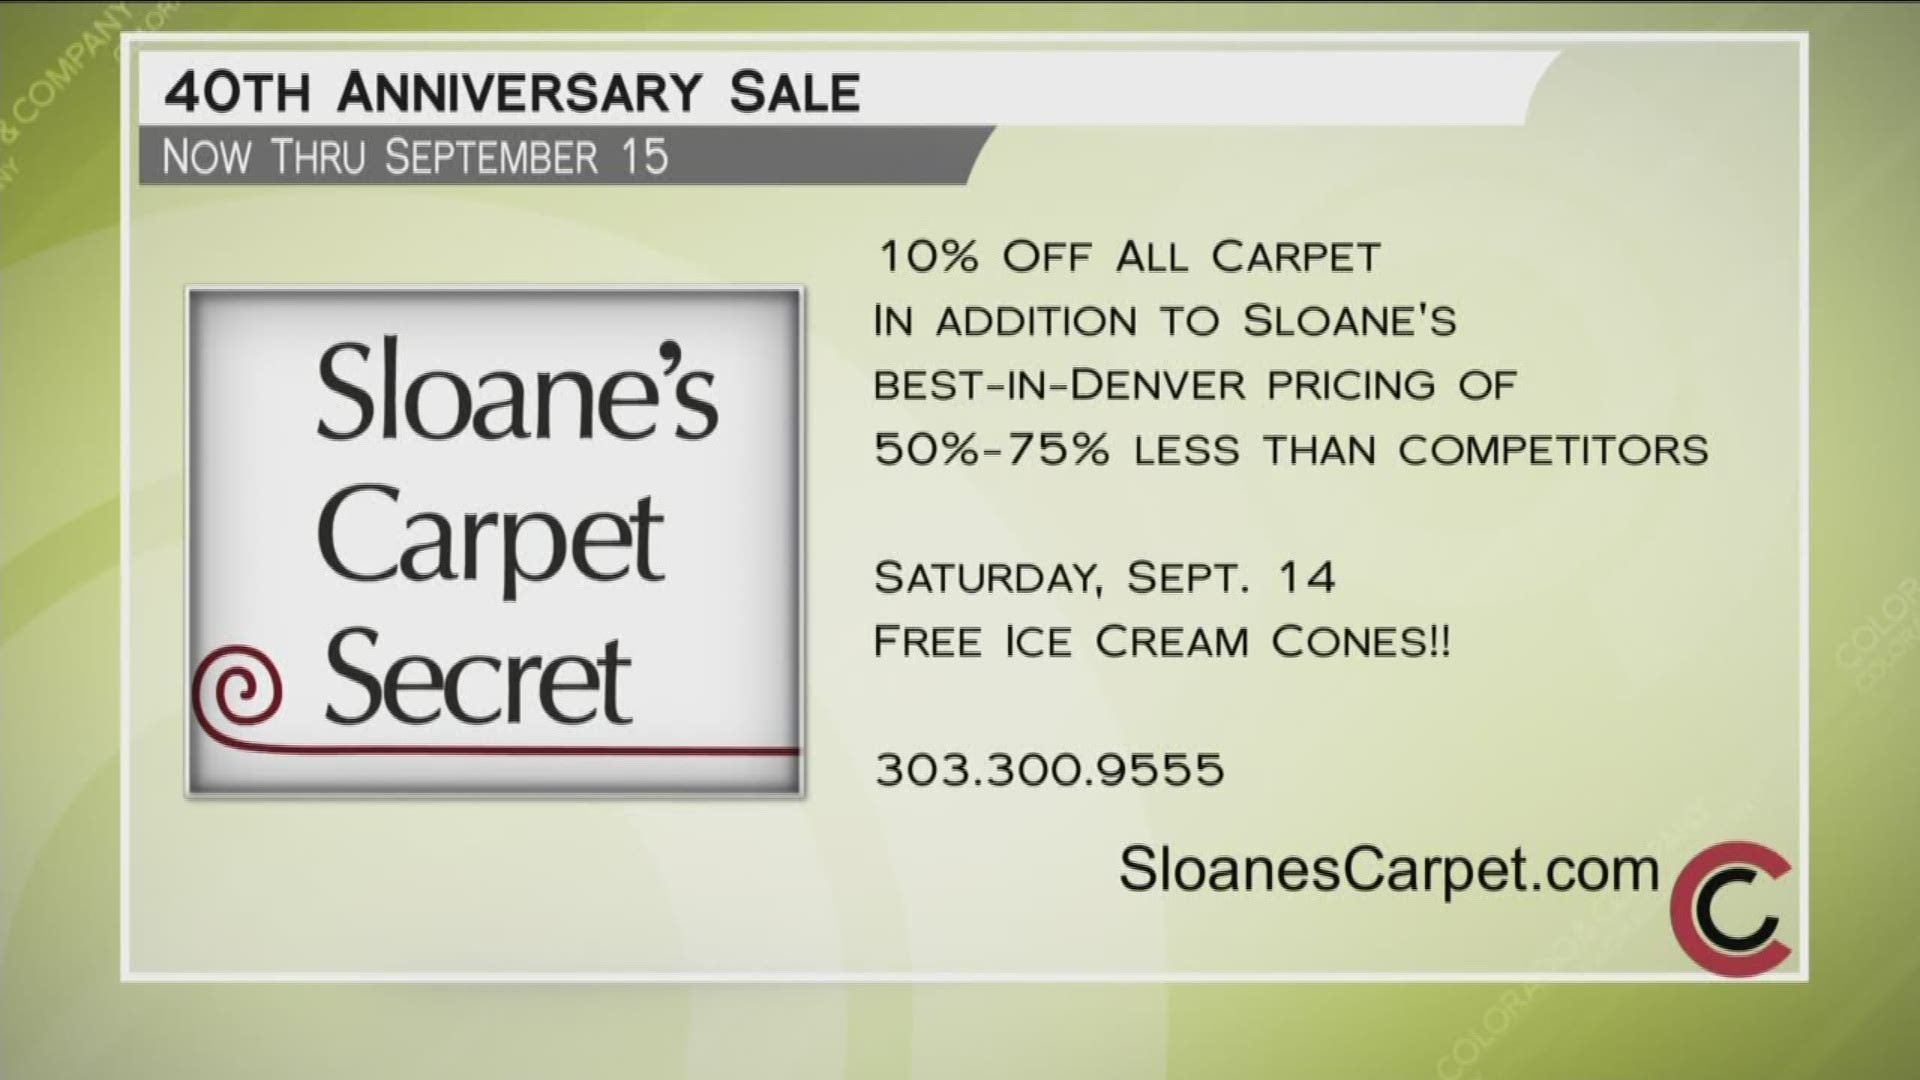 Sloane’s Carpet Secret is celebrating their 40th anniversary with a big sale. Through September 15th, take 10% off your carpet purchase. Luxurious carpet that is already between 50-75% lower than competitors is now even lower during this great sale. If you come by the store on September 14th, Sloane’s is giving out free ice cream cones! Call them today at 303.300.9555, or schedule an appointment online at www.SloanesCarpet.com. 
THIS INTERVIEW HAS COMMERCIAL CONTENT. PRODUCTS AND SERVICES FEATUR